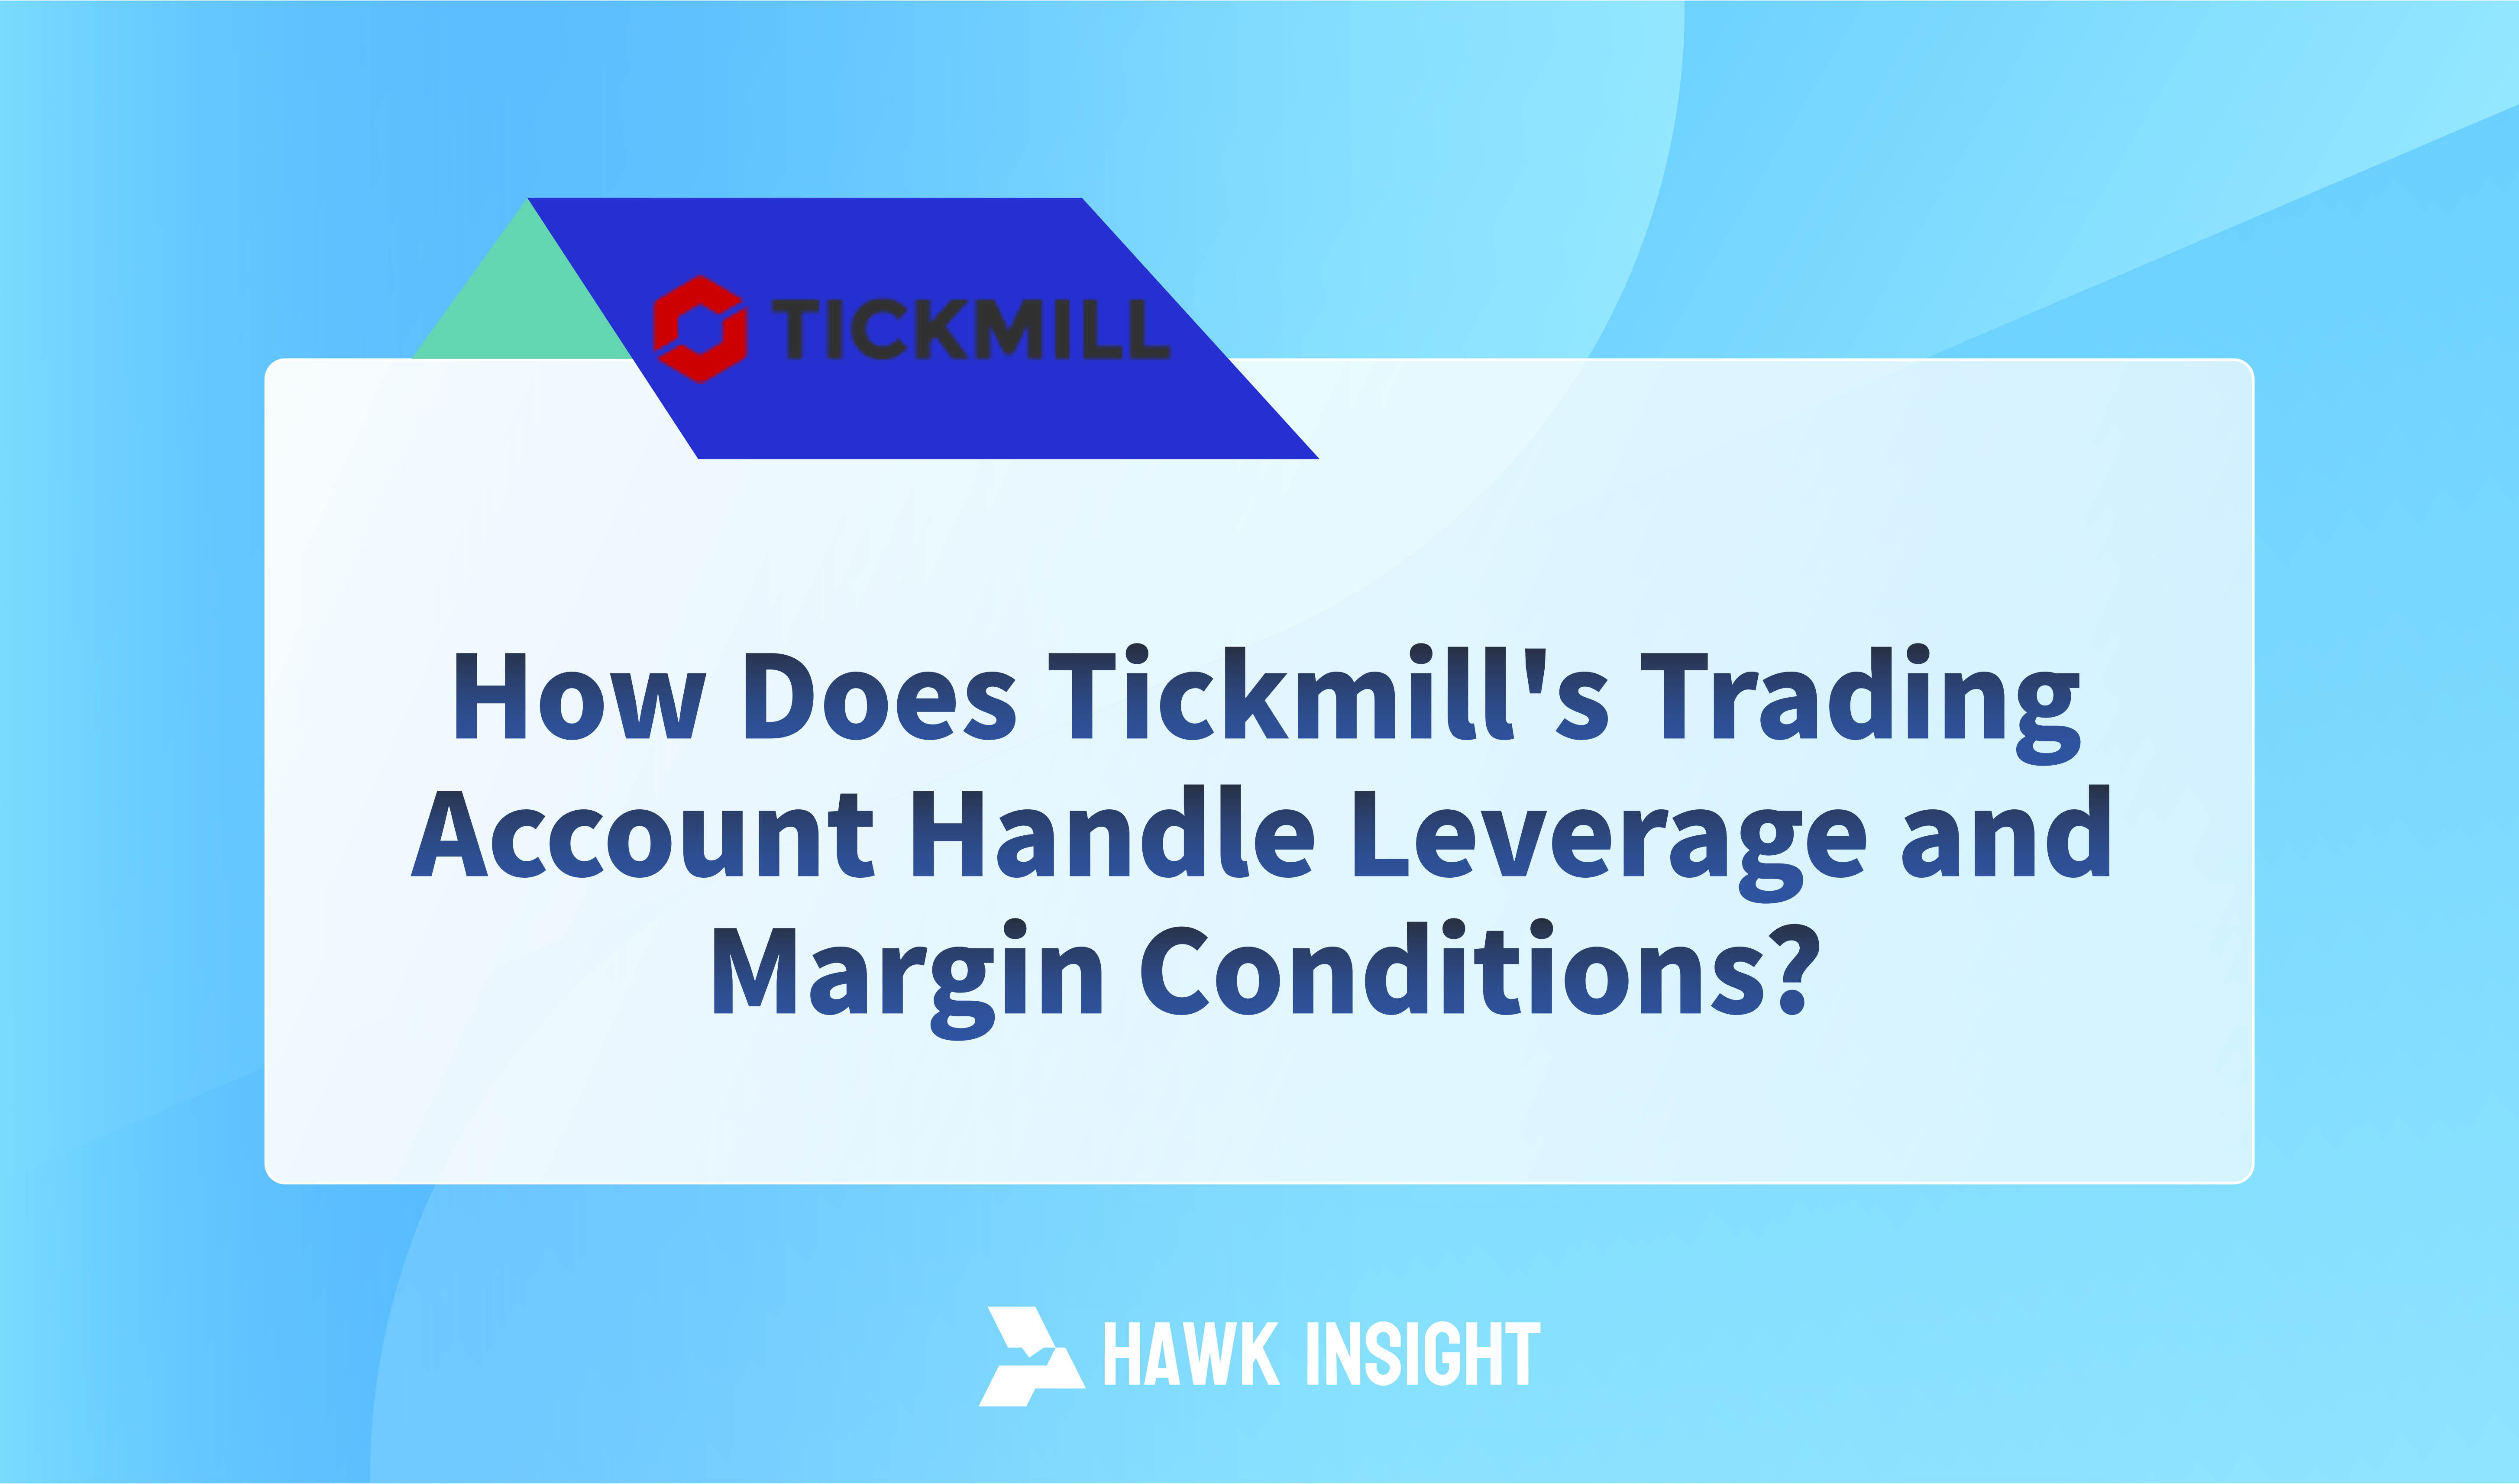 How Does Tickmill's Trading Account Handle Leverage and Margin Conditions?